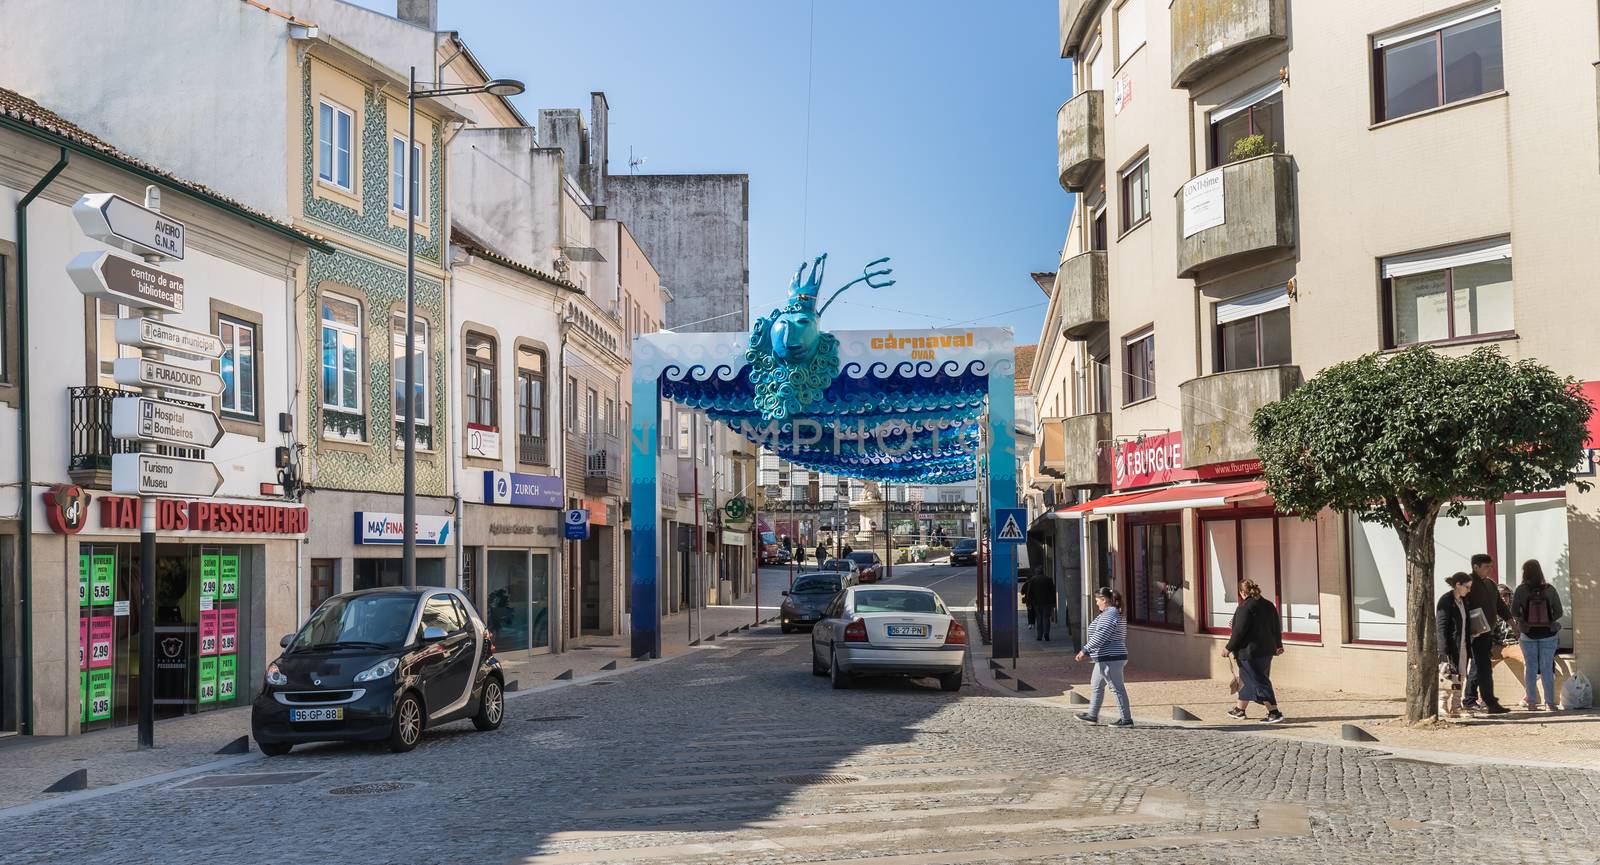 Ovar, Portugal - February 18, 2020: architectural detail of the typical houses of the city decorated for the carnival where people are walking on a winter day